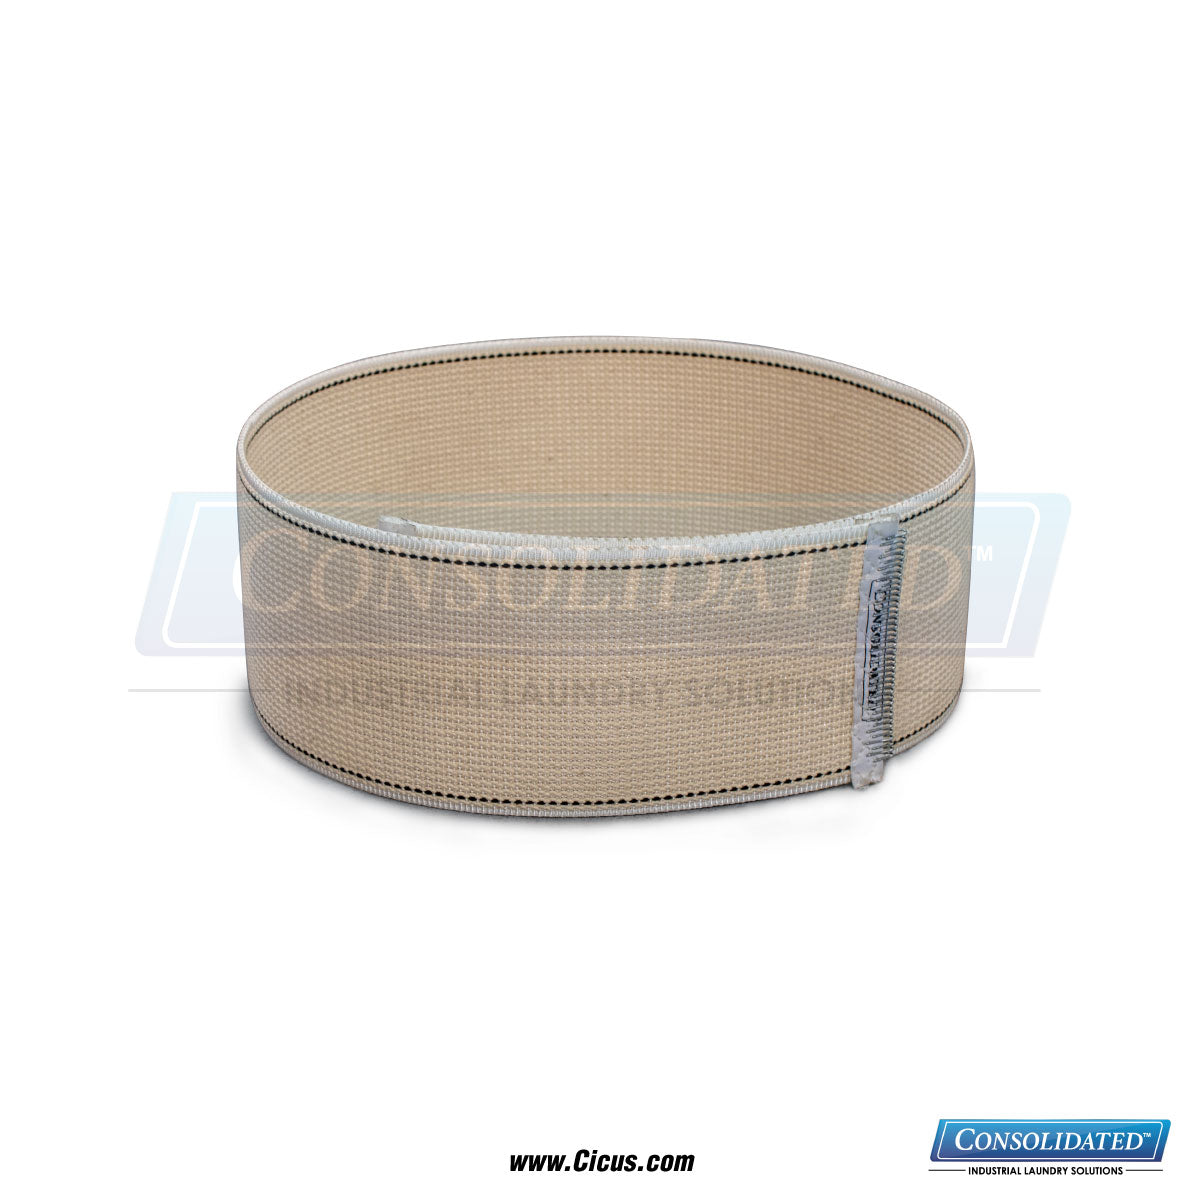 CIC Exclusive Chicago Dryer Canvas Ribbon - 2" x 107" (1001-023)